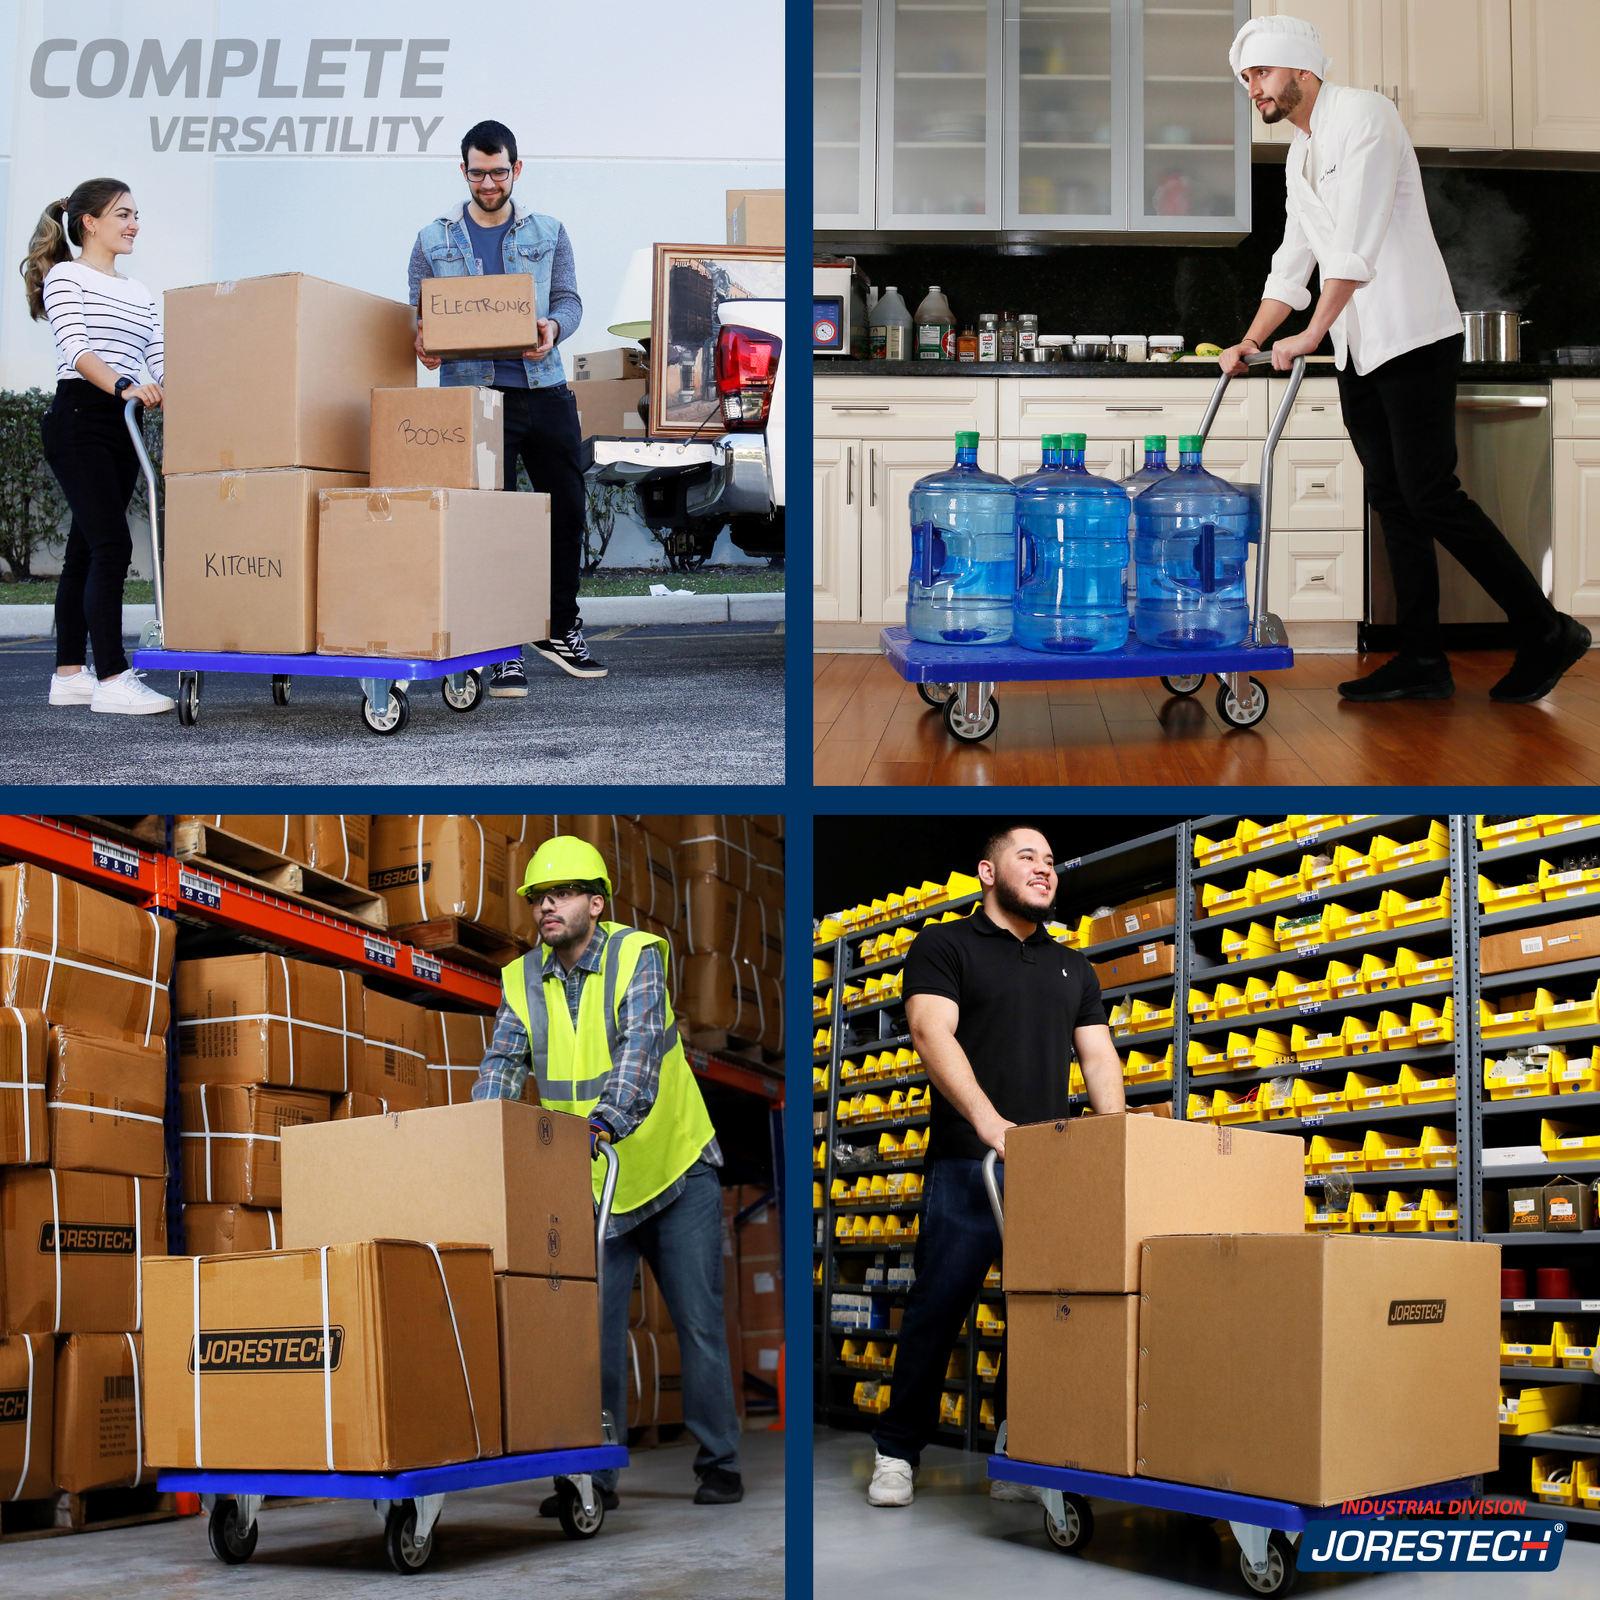 Split banner in four showing the Jorestech foldable platform cart being used for moving belongings, in a professional kitchen transporting large water jugs, and in  two different warehouses departments